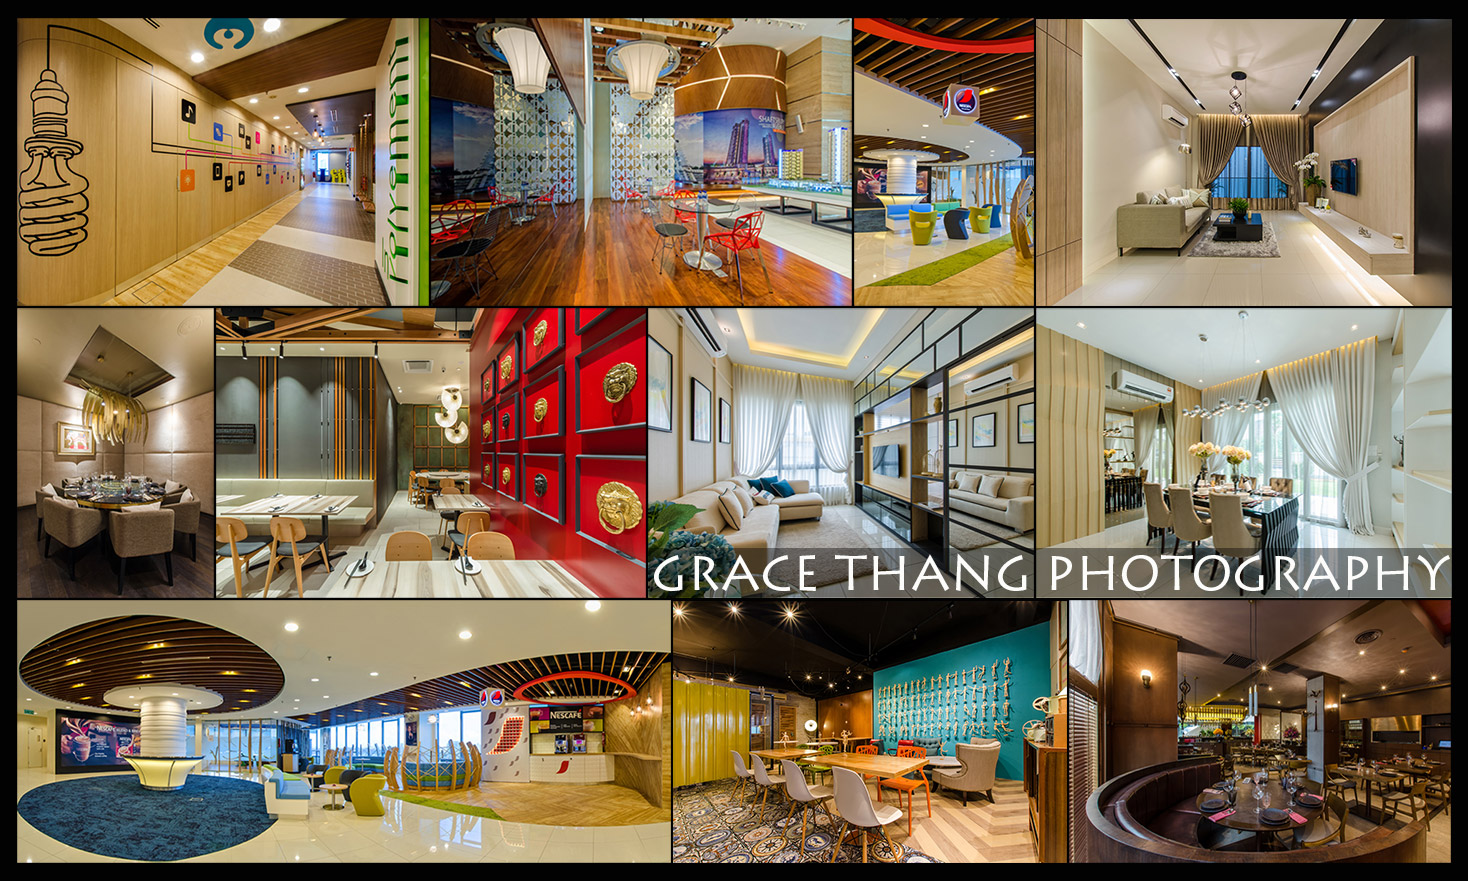 GRACE THANG PHOTOGRAPHY